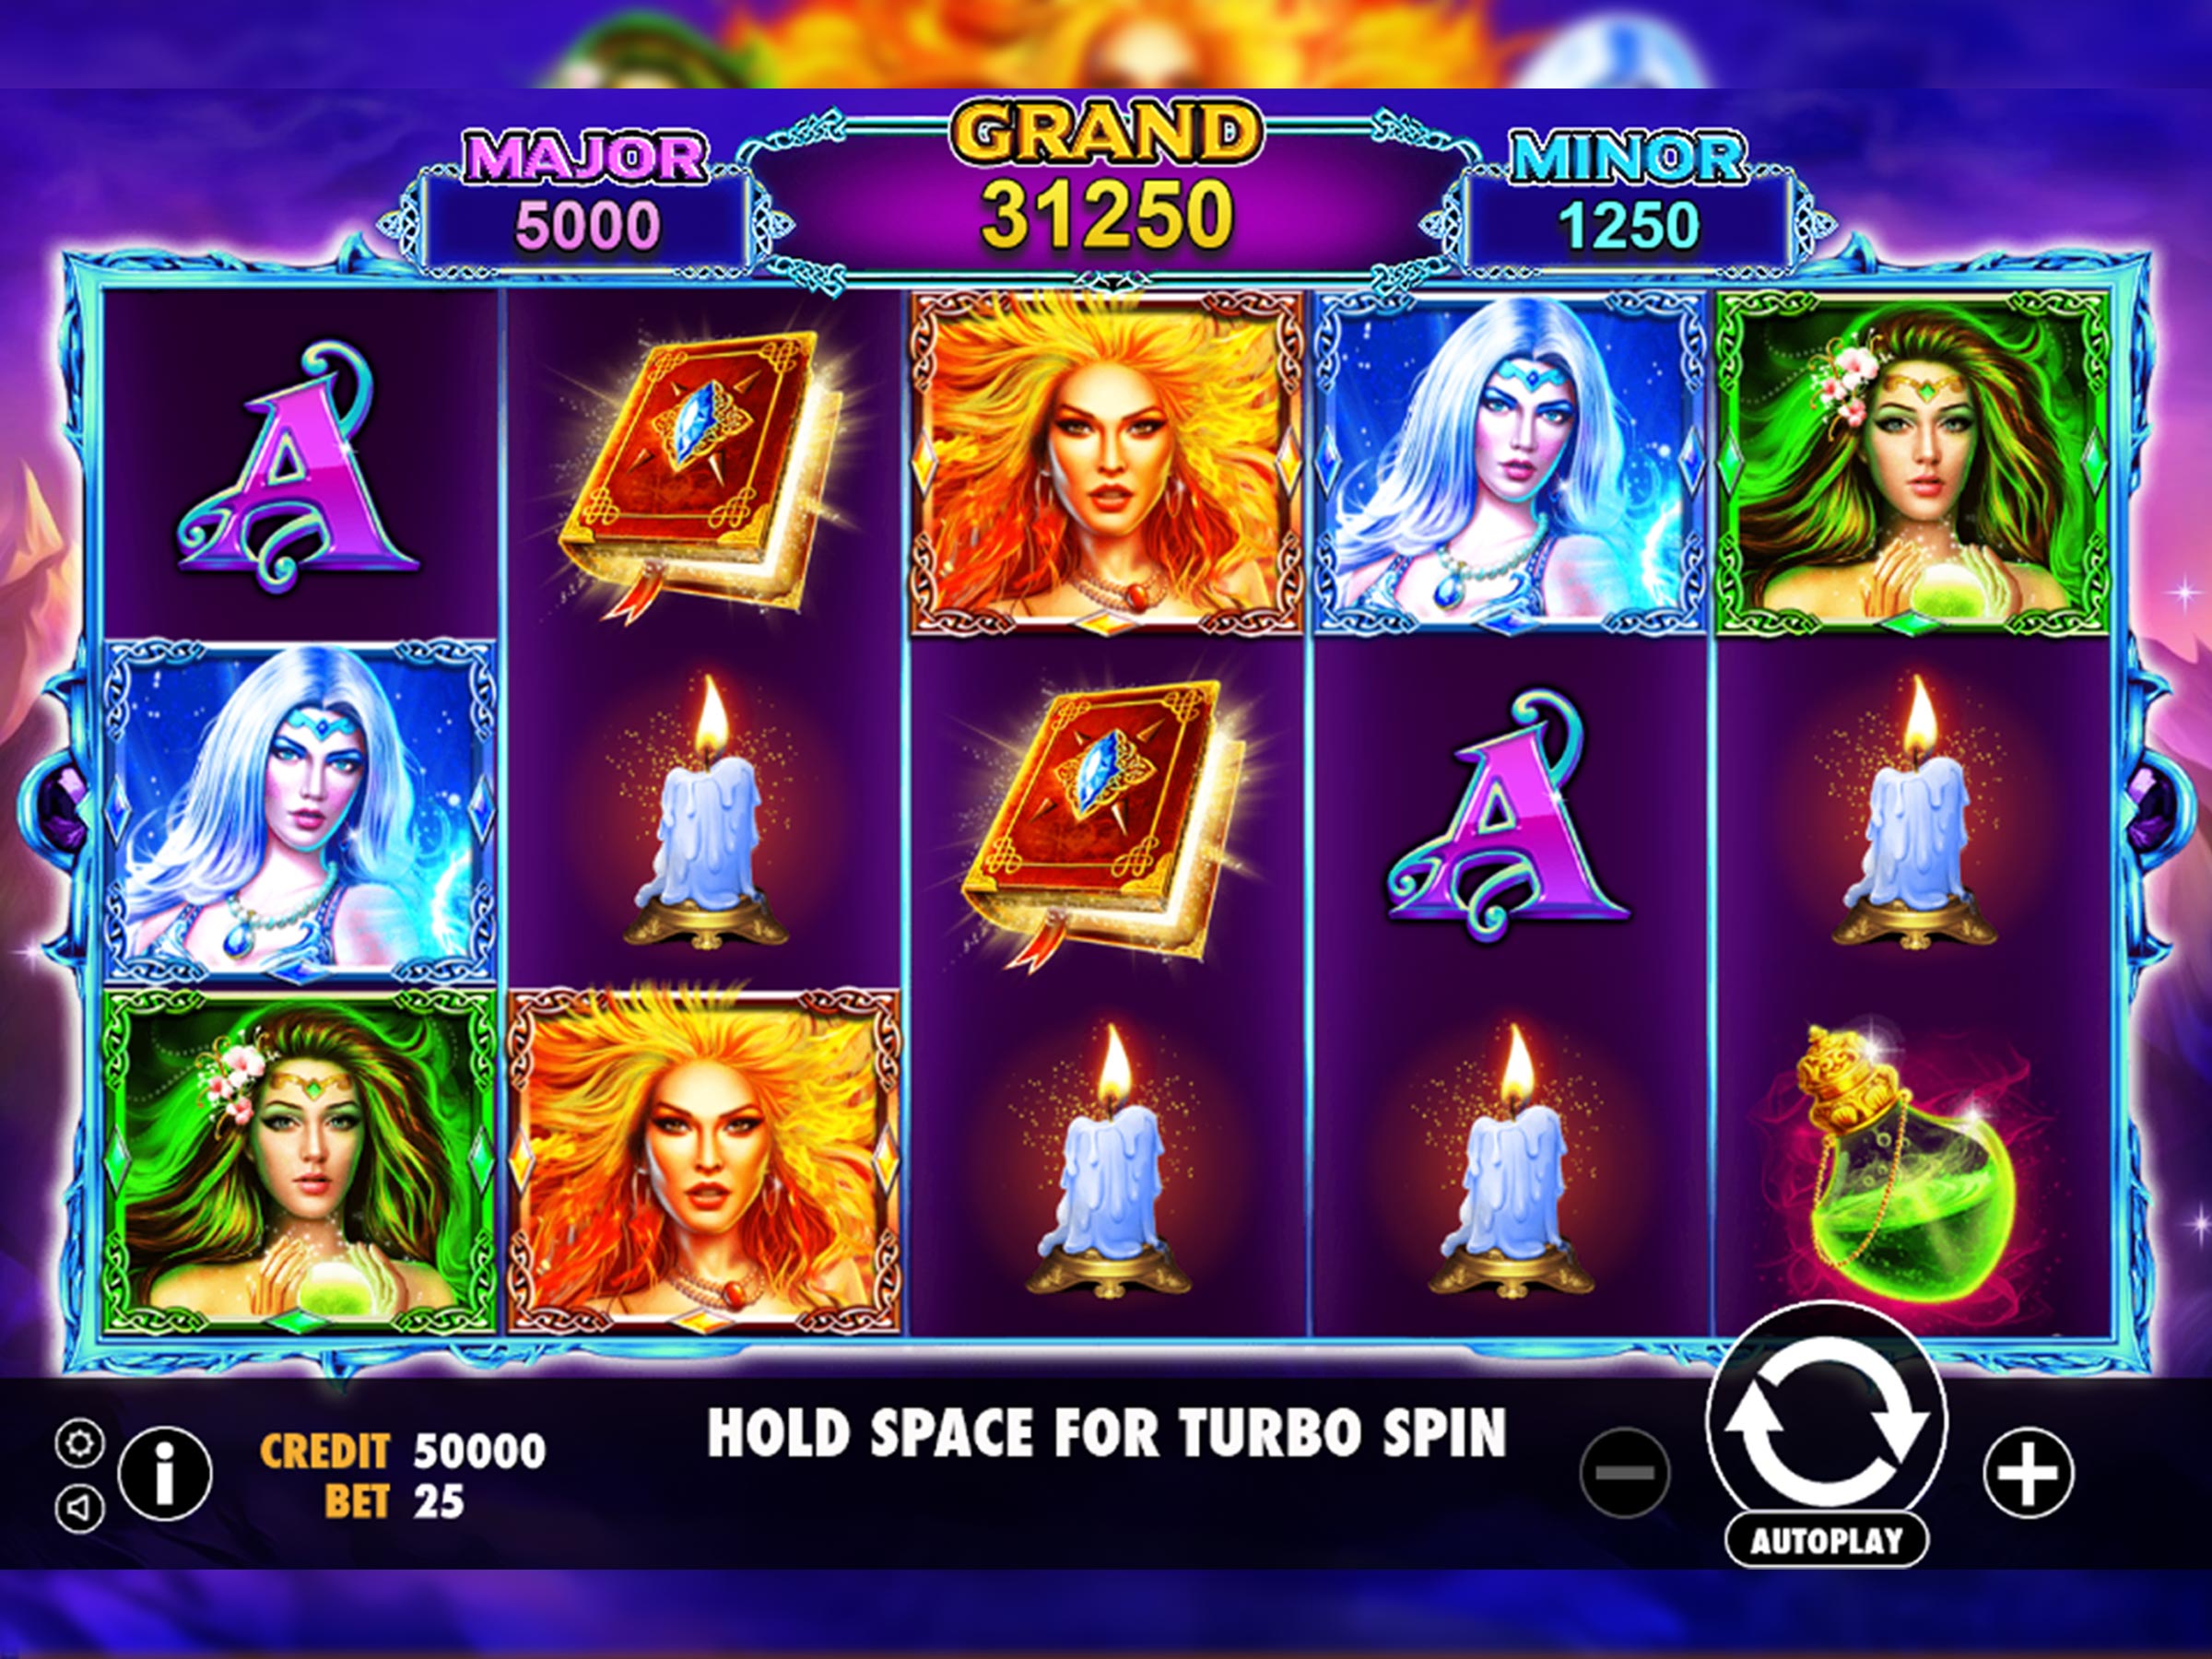 3 witches slot